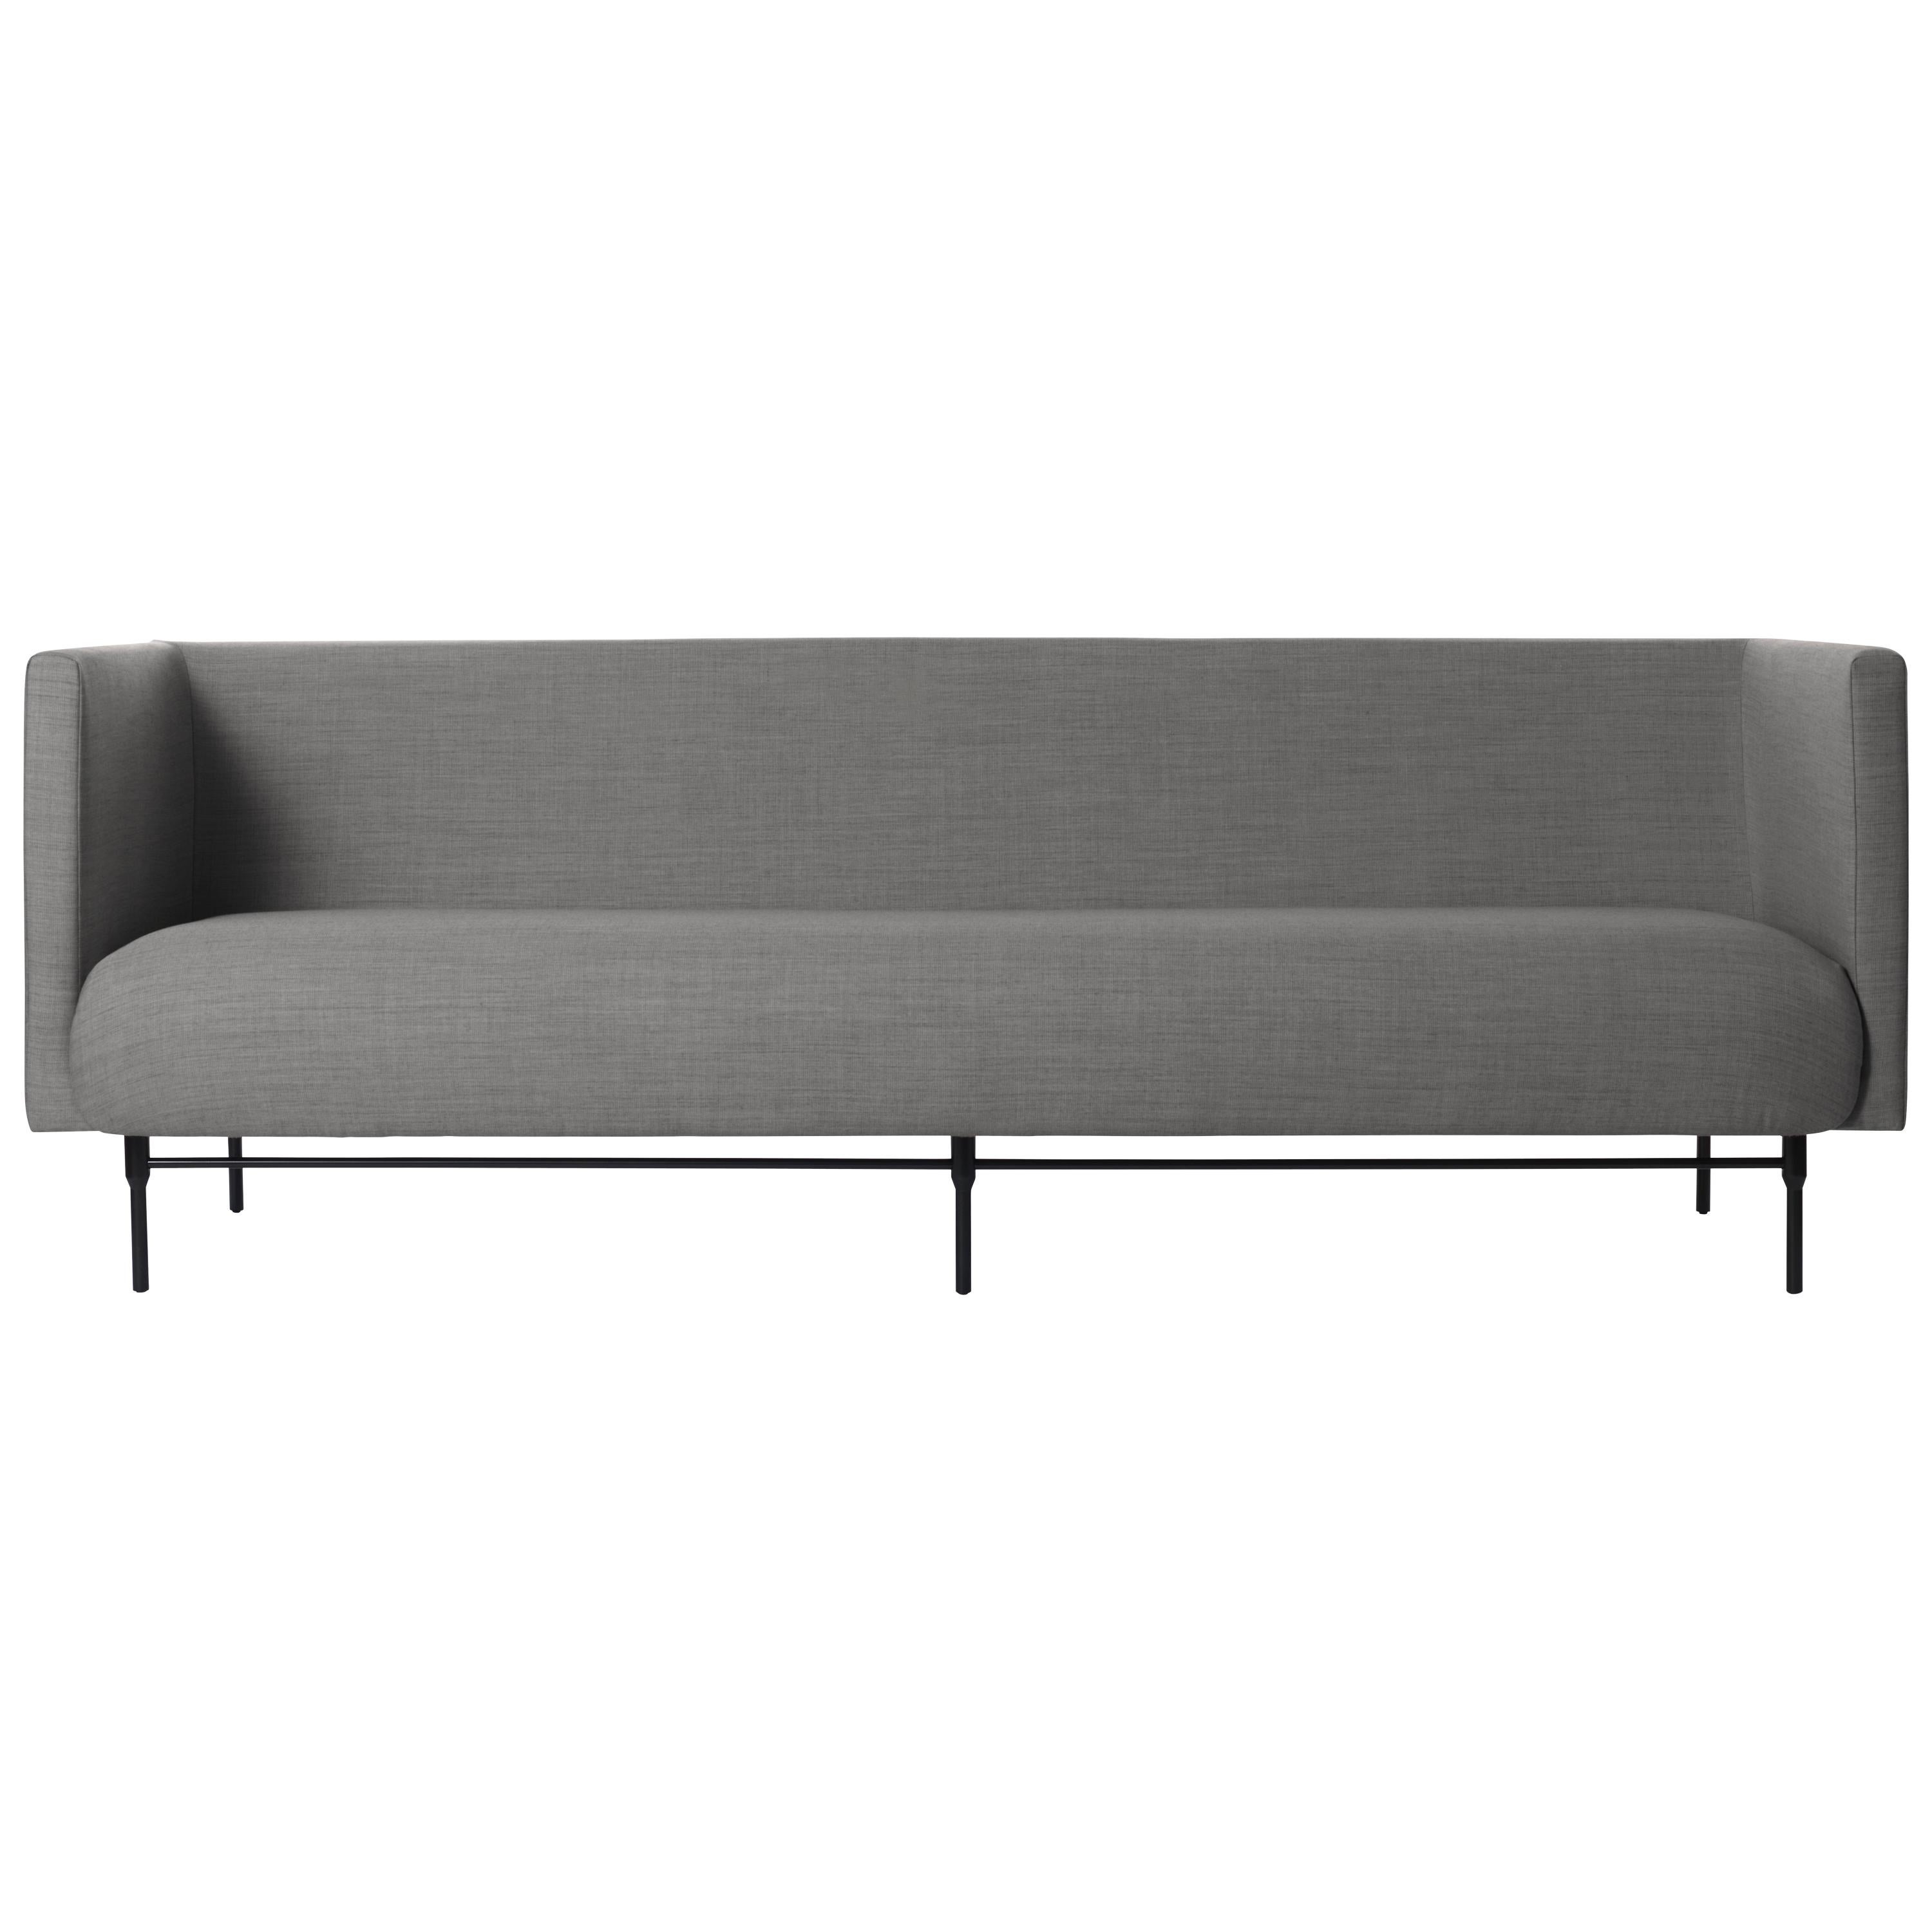 For Sale: Gray (Canvas 134) Galore 3-Seat Sofa, by Rikke Frost from Warm Nordic